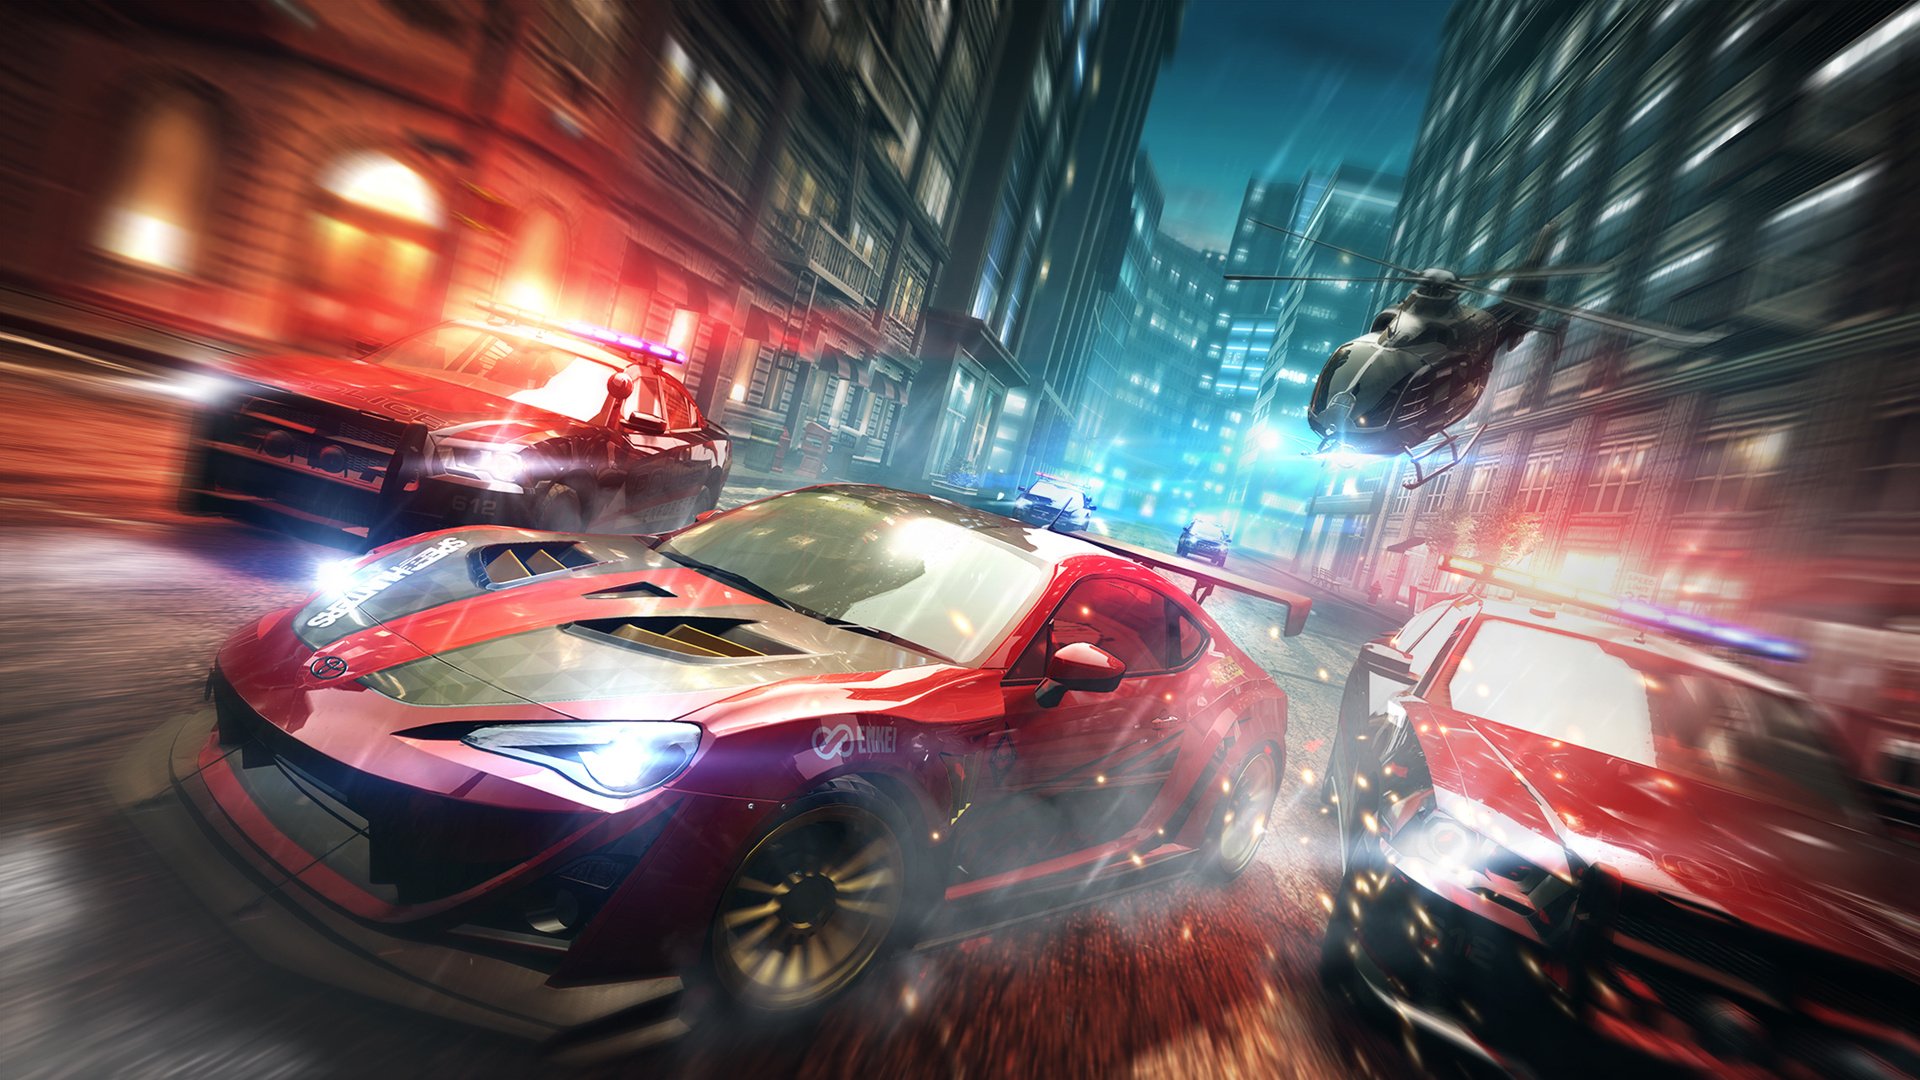 ea-removes-all-traces-of-previous-need-for-speed-games-ahead-of